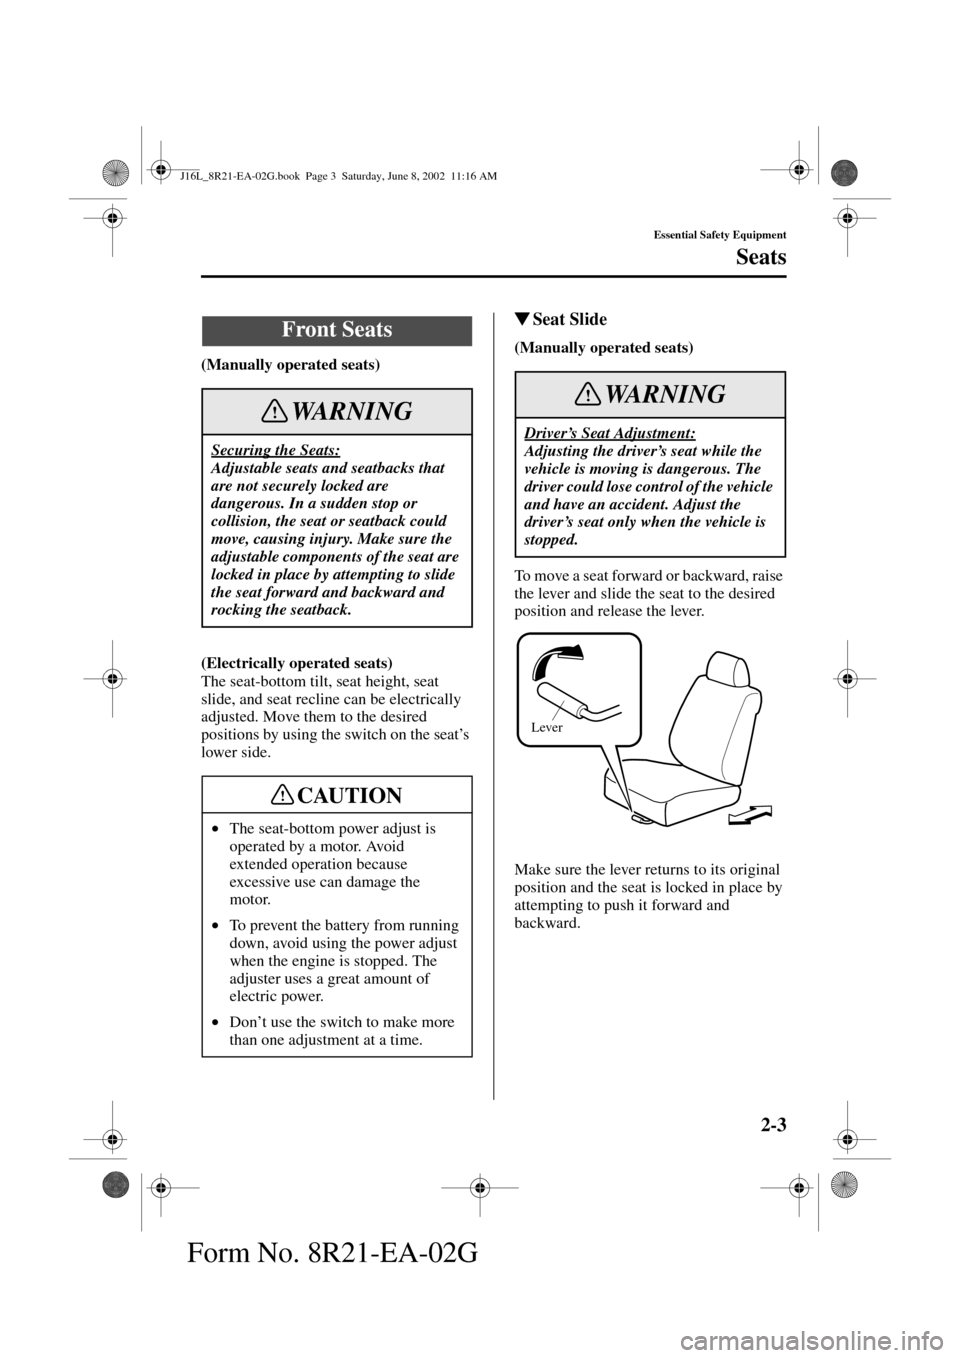 MAZDA MODEL MPV 2003  Owners Manual (in English) 2-3
Essential Safety Equipment
Seats
Form No. 8R21-EA-02G
(Manually operated seats)
(Electrically operated seats)
The seat-bottom tilt, seat height, seat 
slide, and seat recline can be electrically 
